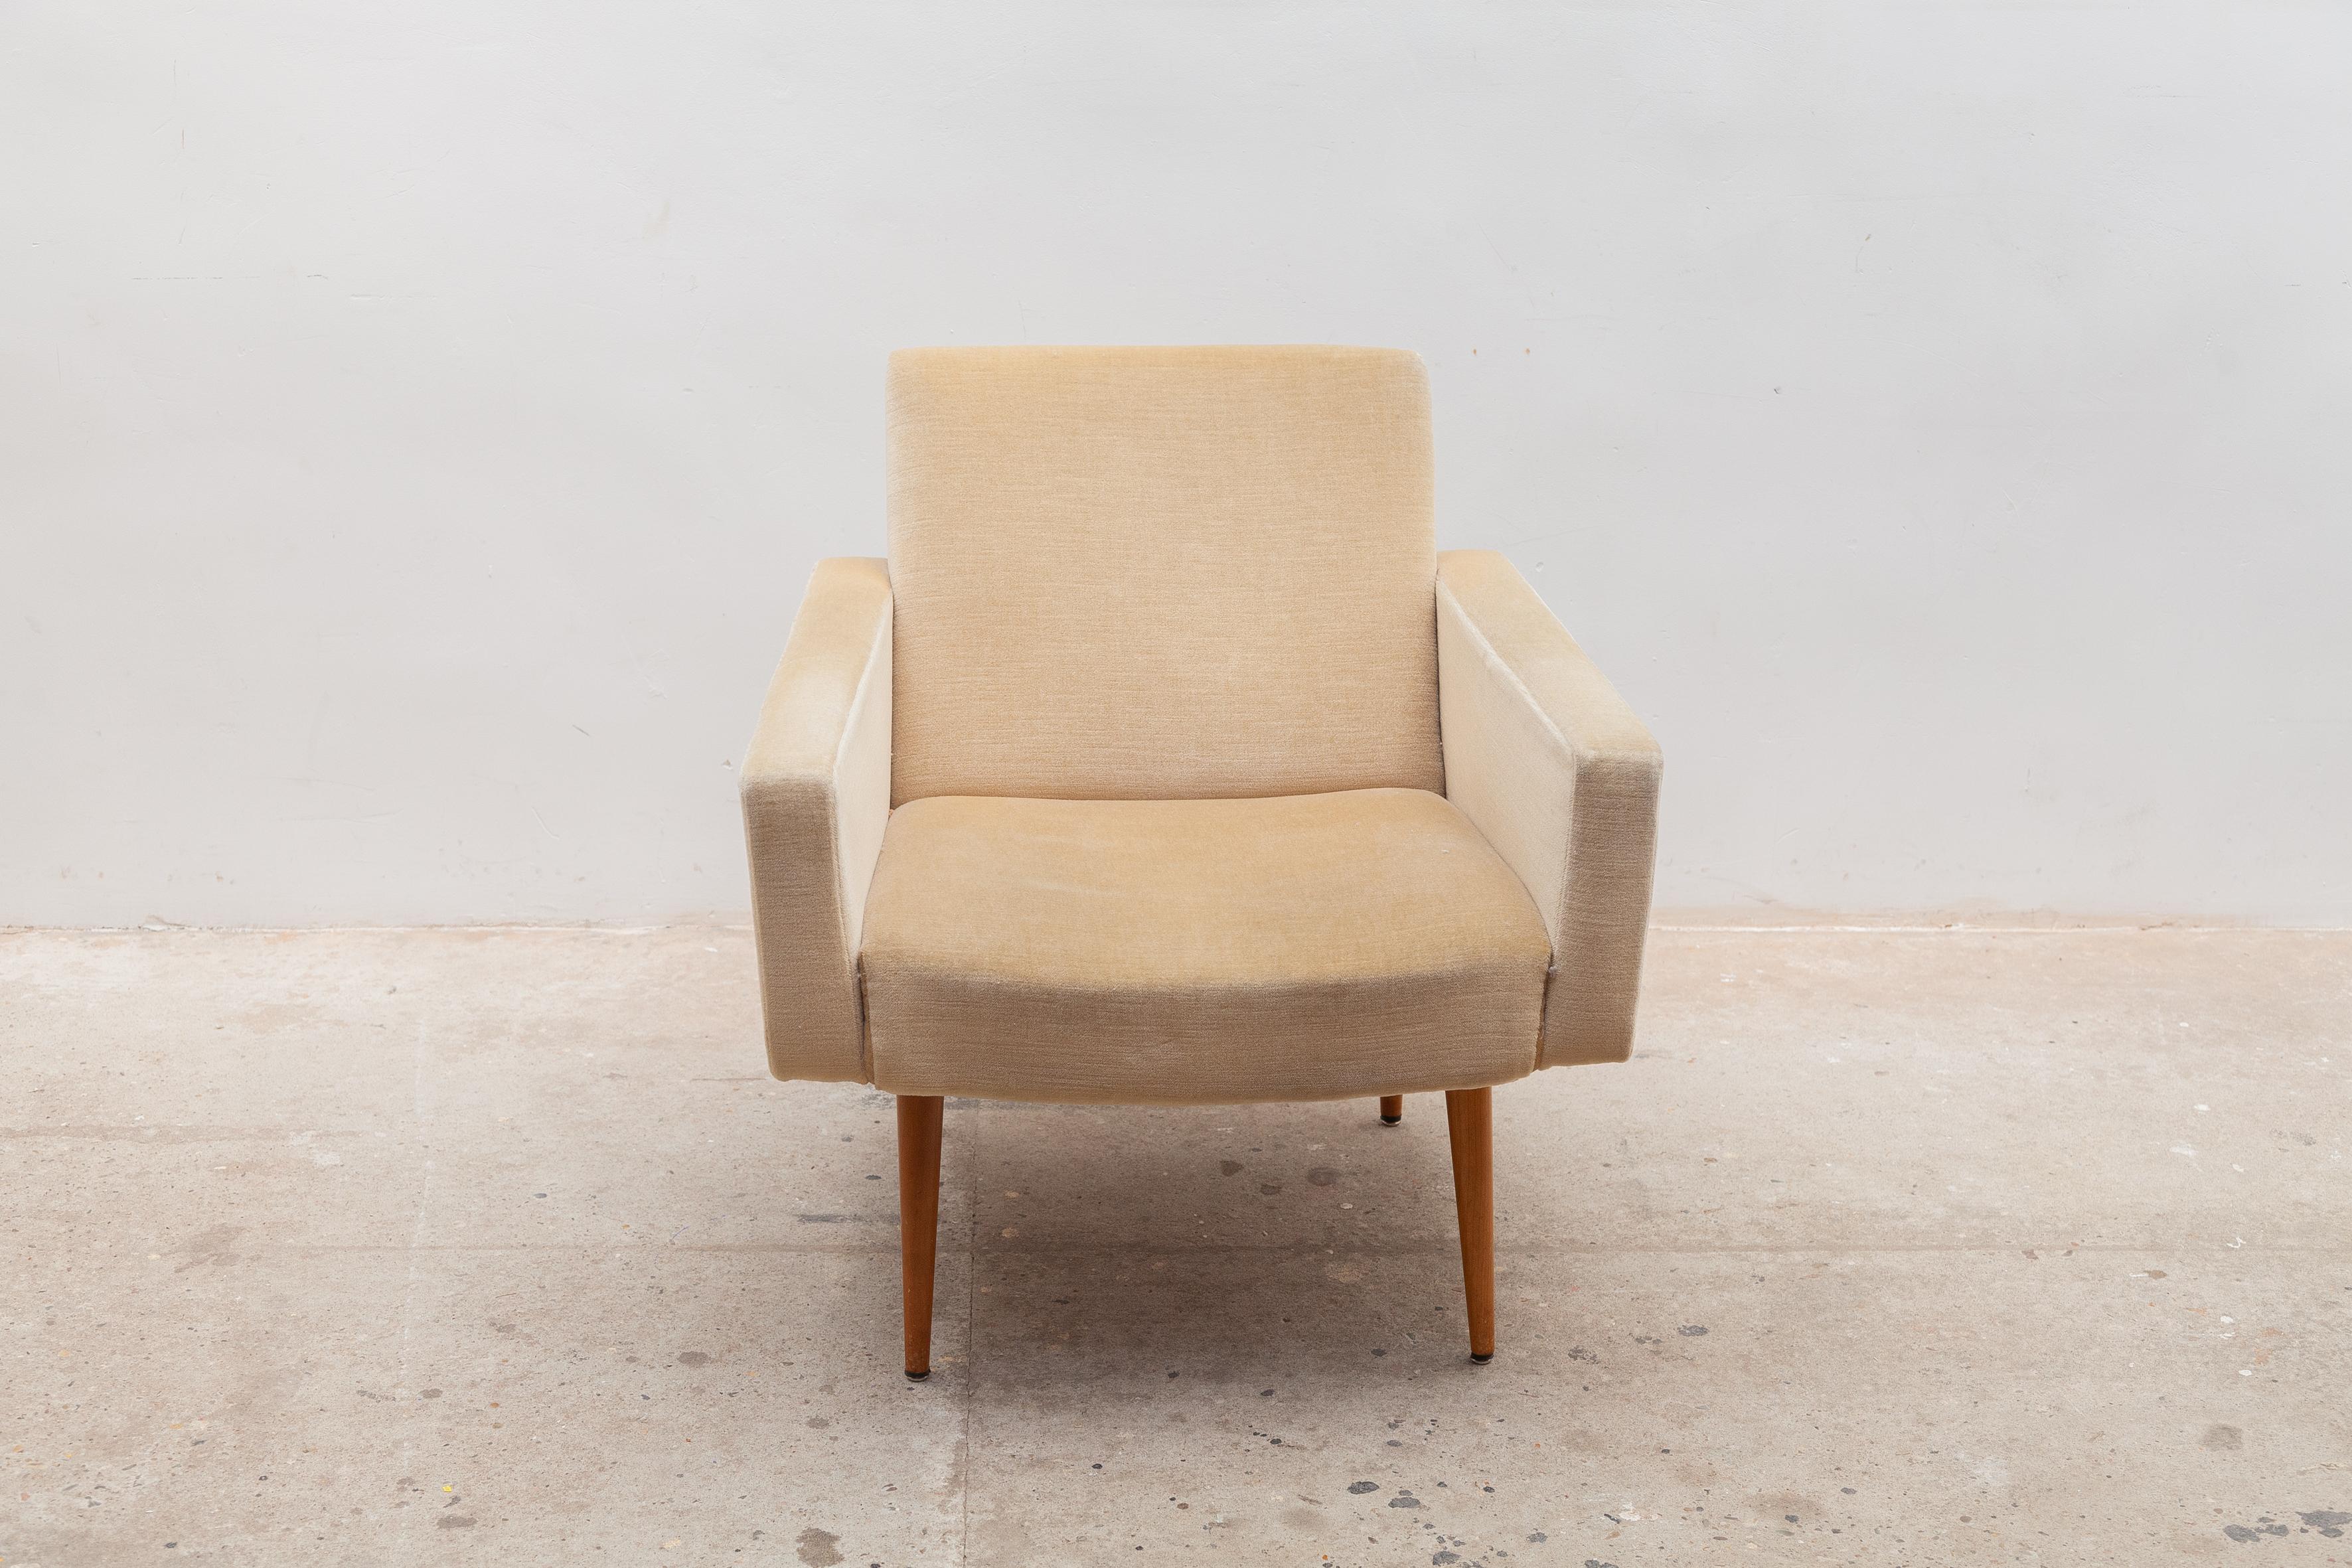 Midcentury armchair manufactured and designed by Walter Knoll 